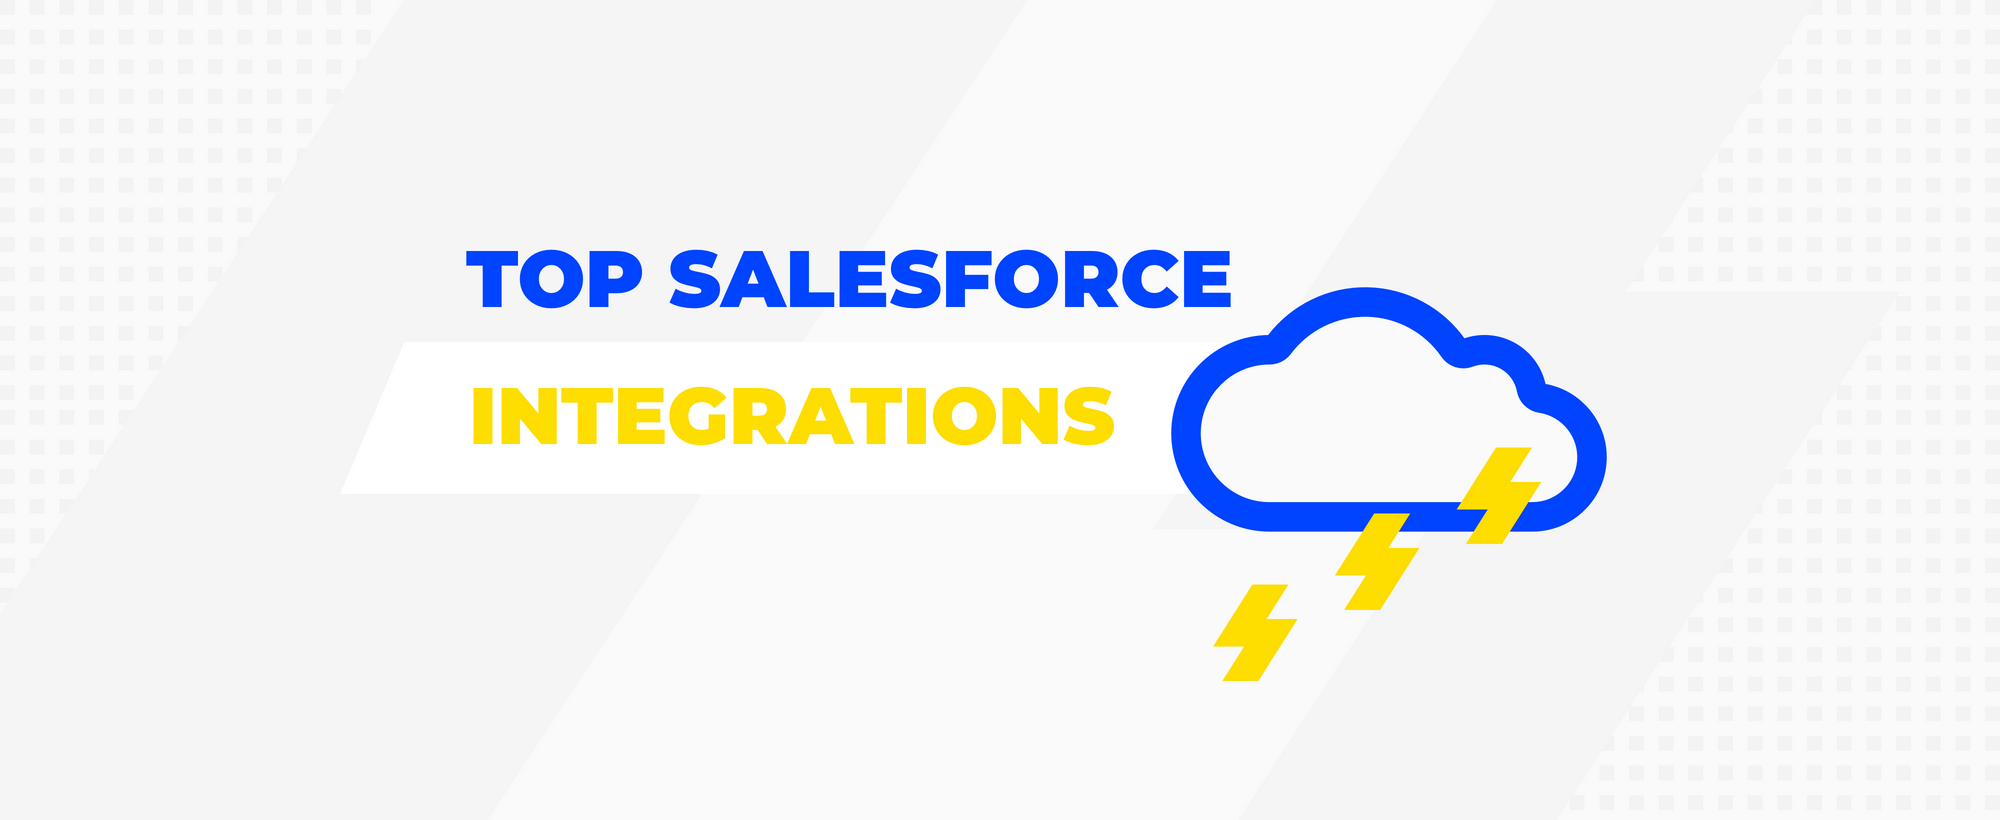 Top Salesforce Integrations You Need To Know in 2022